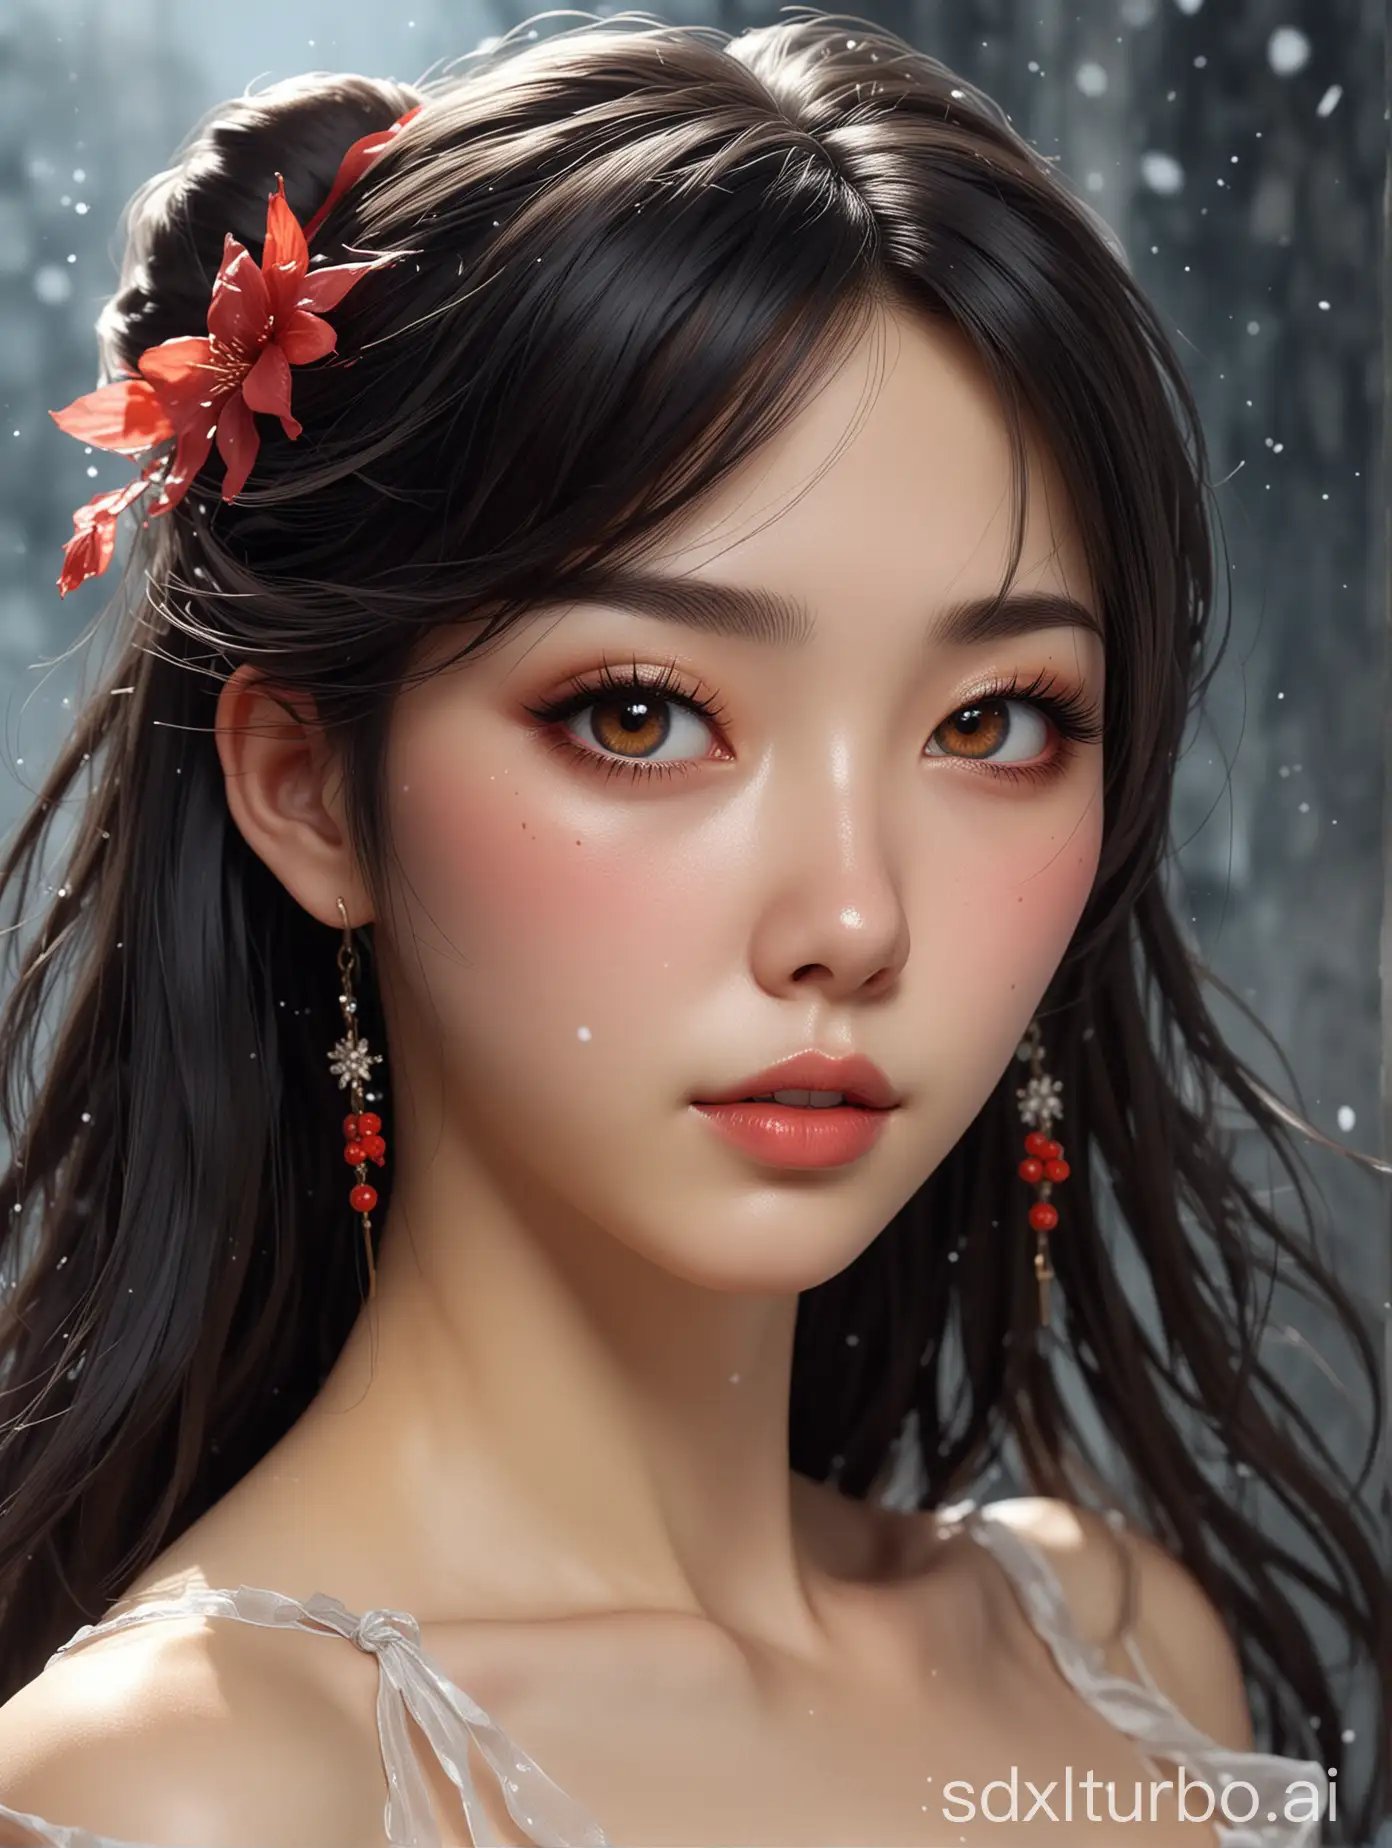 Chinese-Guzhuang-Beauty-in-Snowy-Landscape-Elegant-Ink-Sketch-of-a-Delicate-Girl-with-Red-Eyes